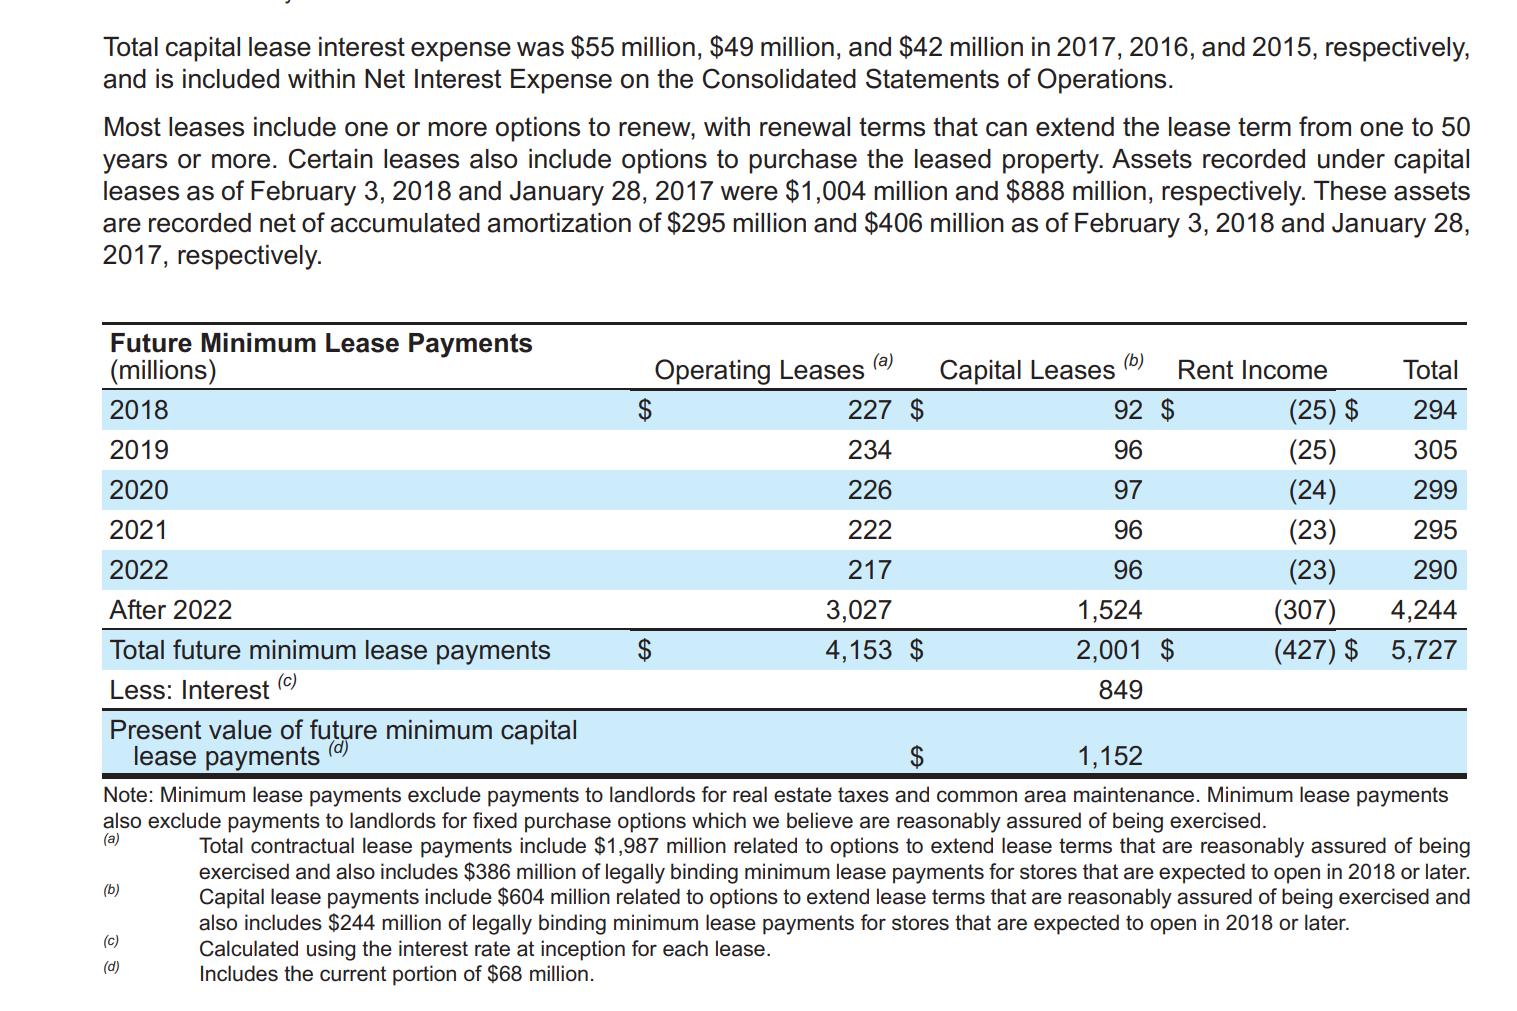 Total capital lease interest expense was $55 million, $49 million, and $42 million in 2017, 2016, and 2015, respectively, and